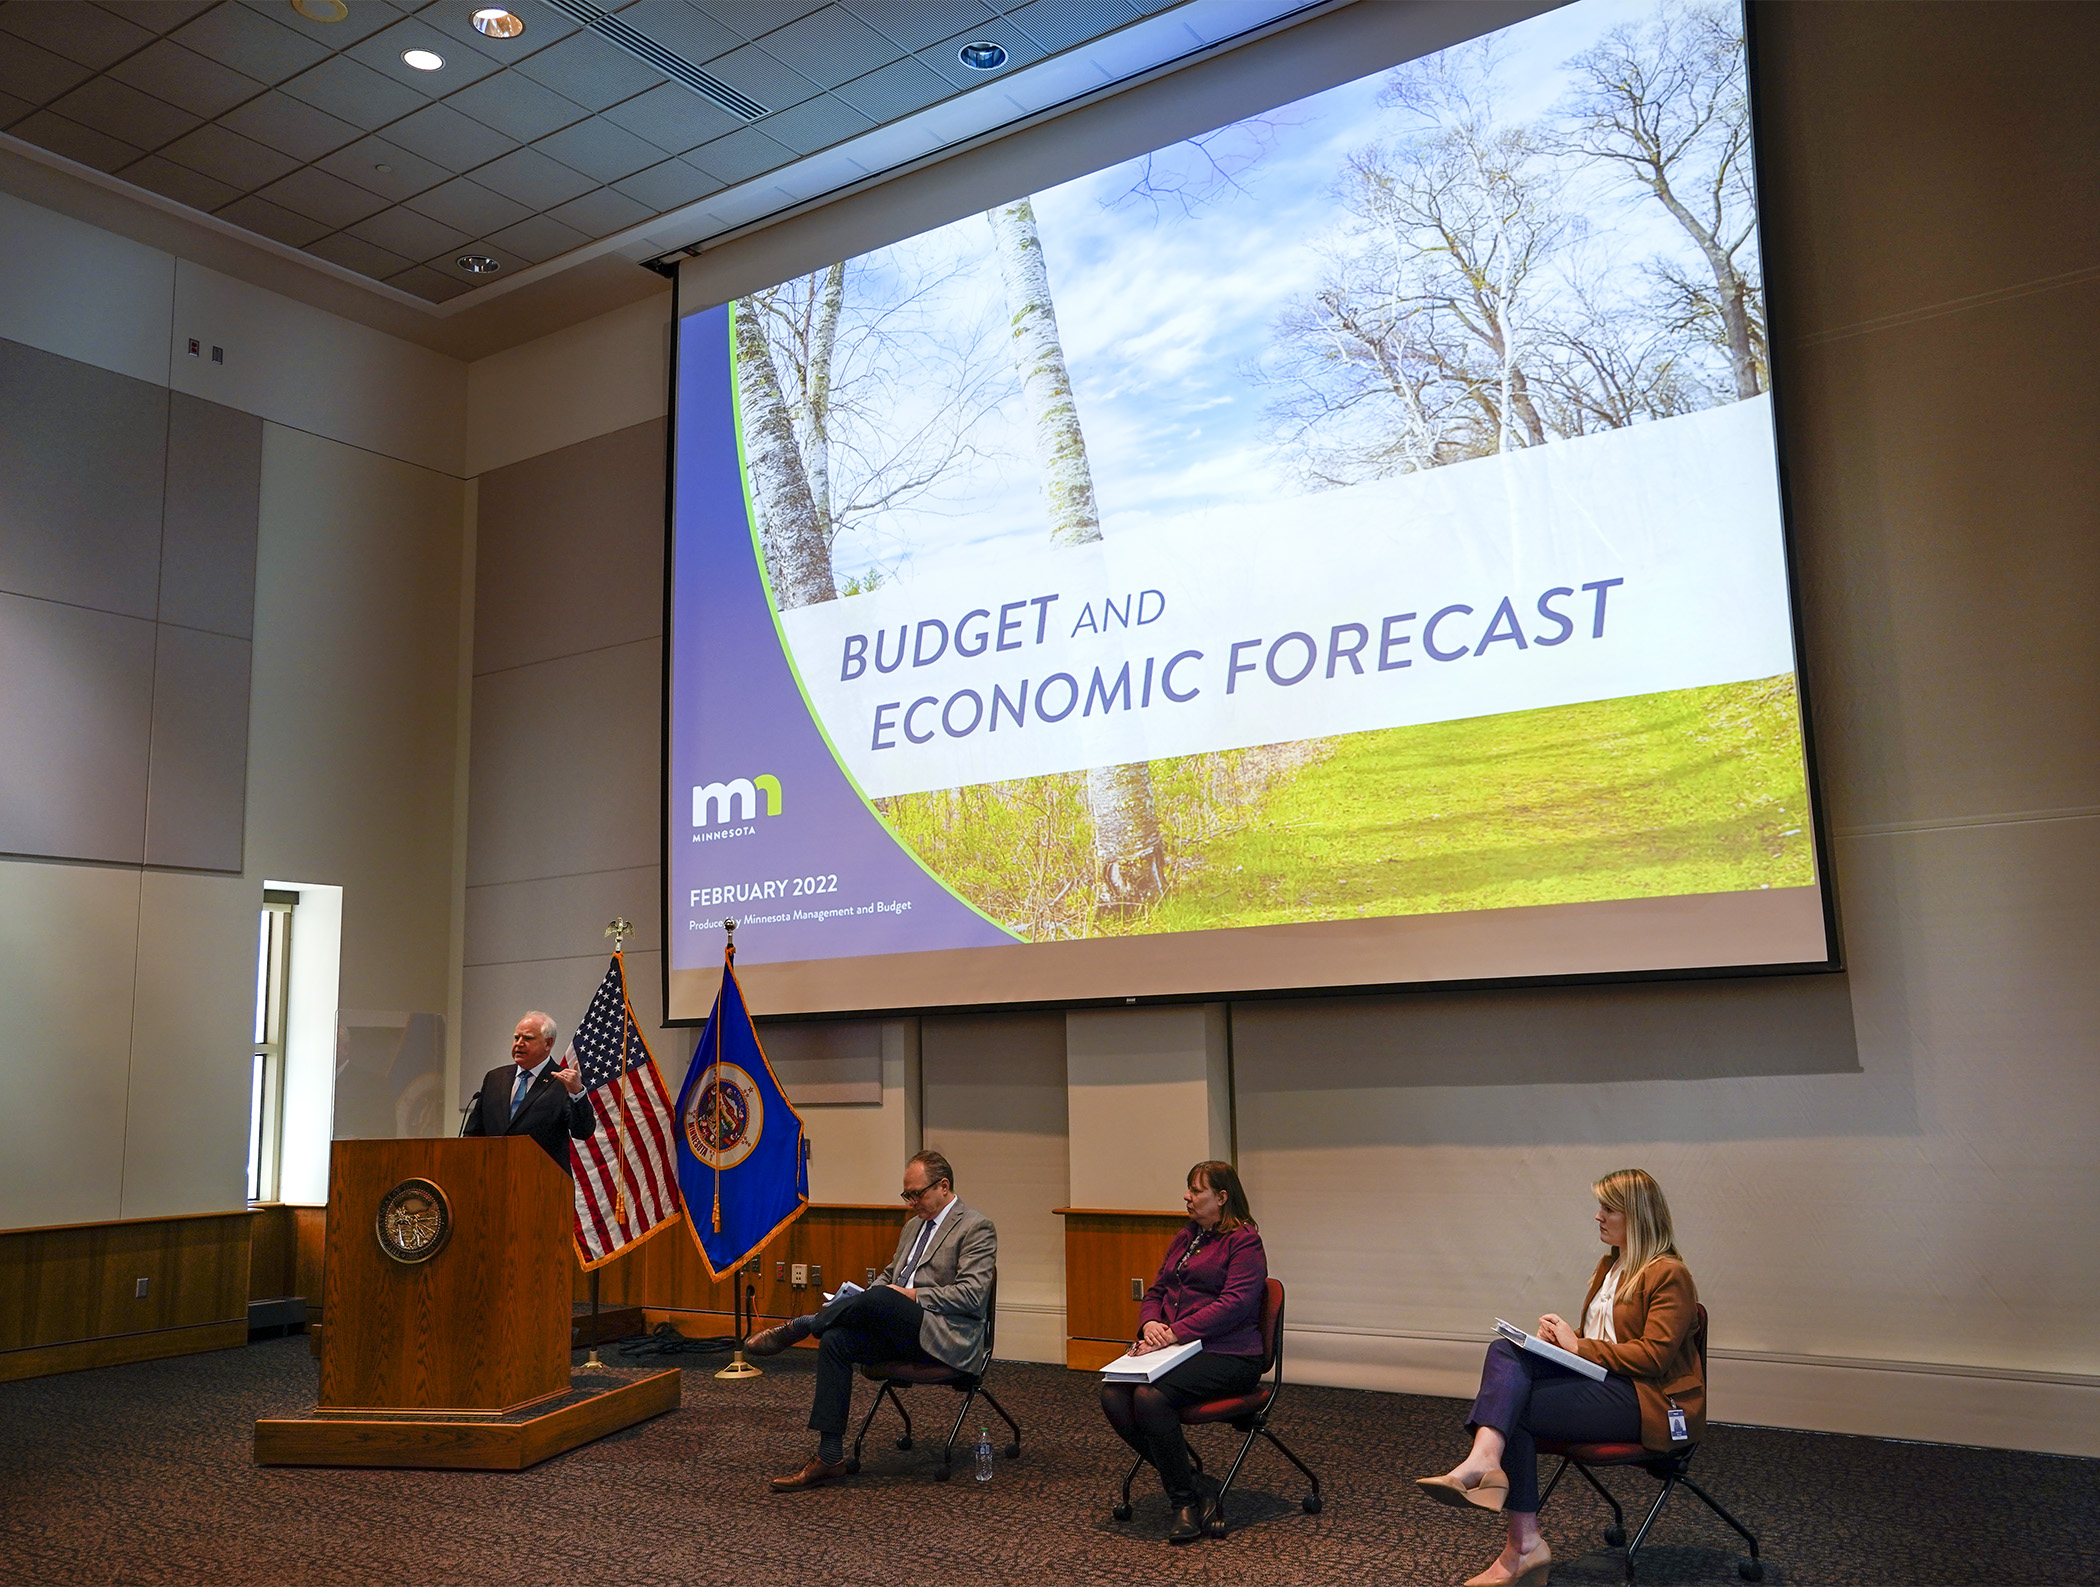 Gov. Tim Walz shares his thoughts on the February 2022 Budget and Economic Forecast during a news conference Monday. The newest forecast projects the Minnesota to have a $9.3 billion surplus. (Photo by Paul Battaglia)